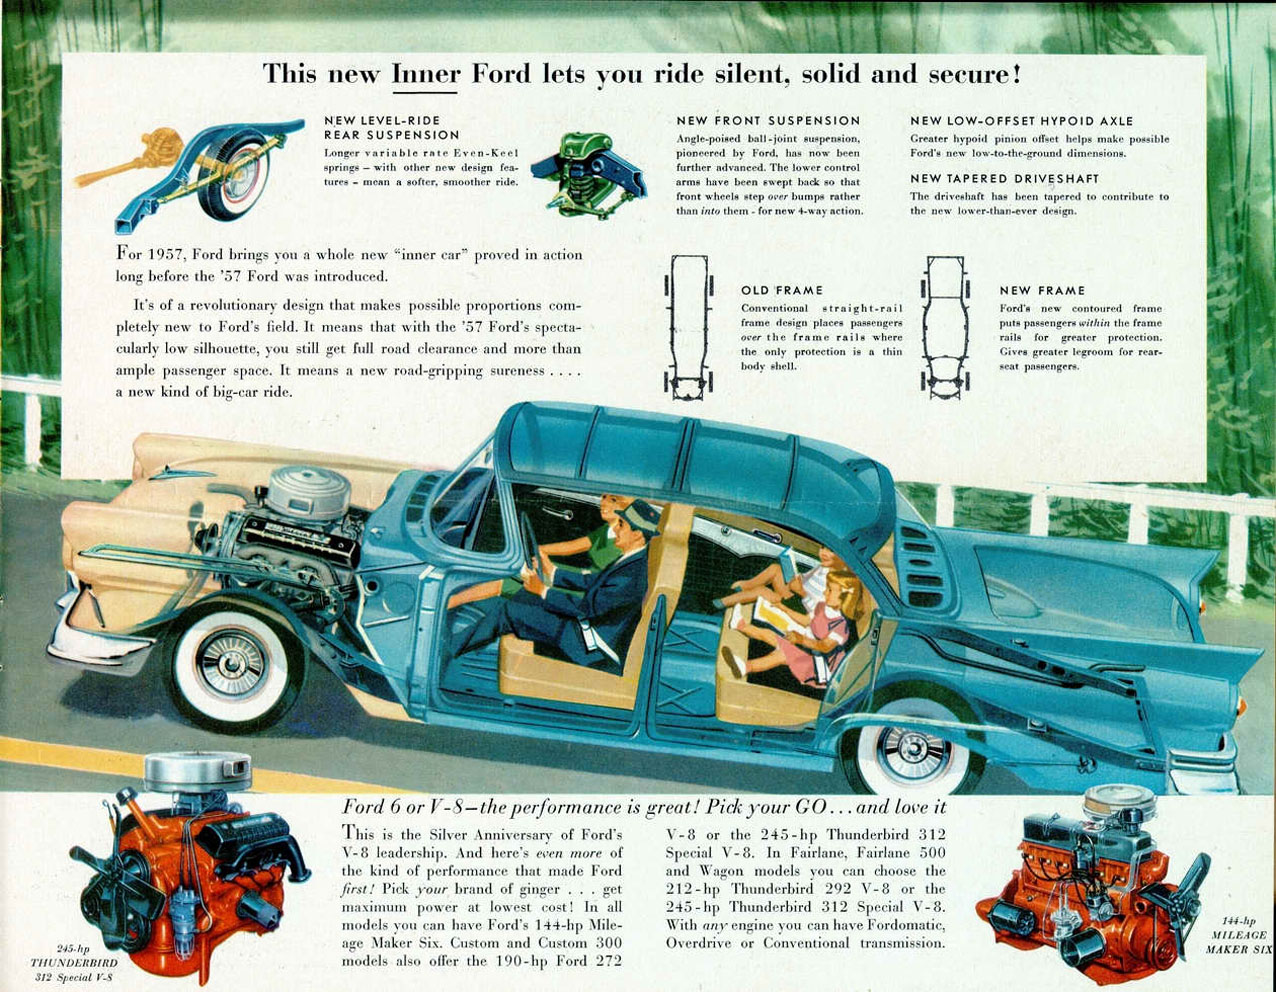 1957 Ford Full-Line Brochure Page 2